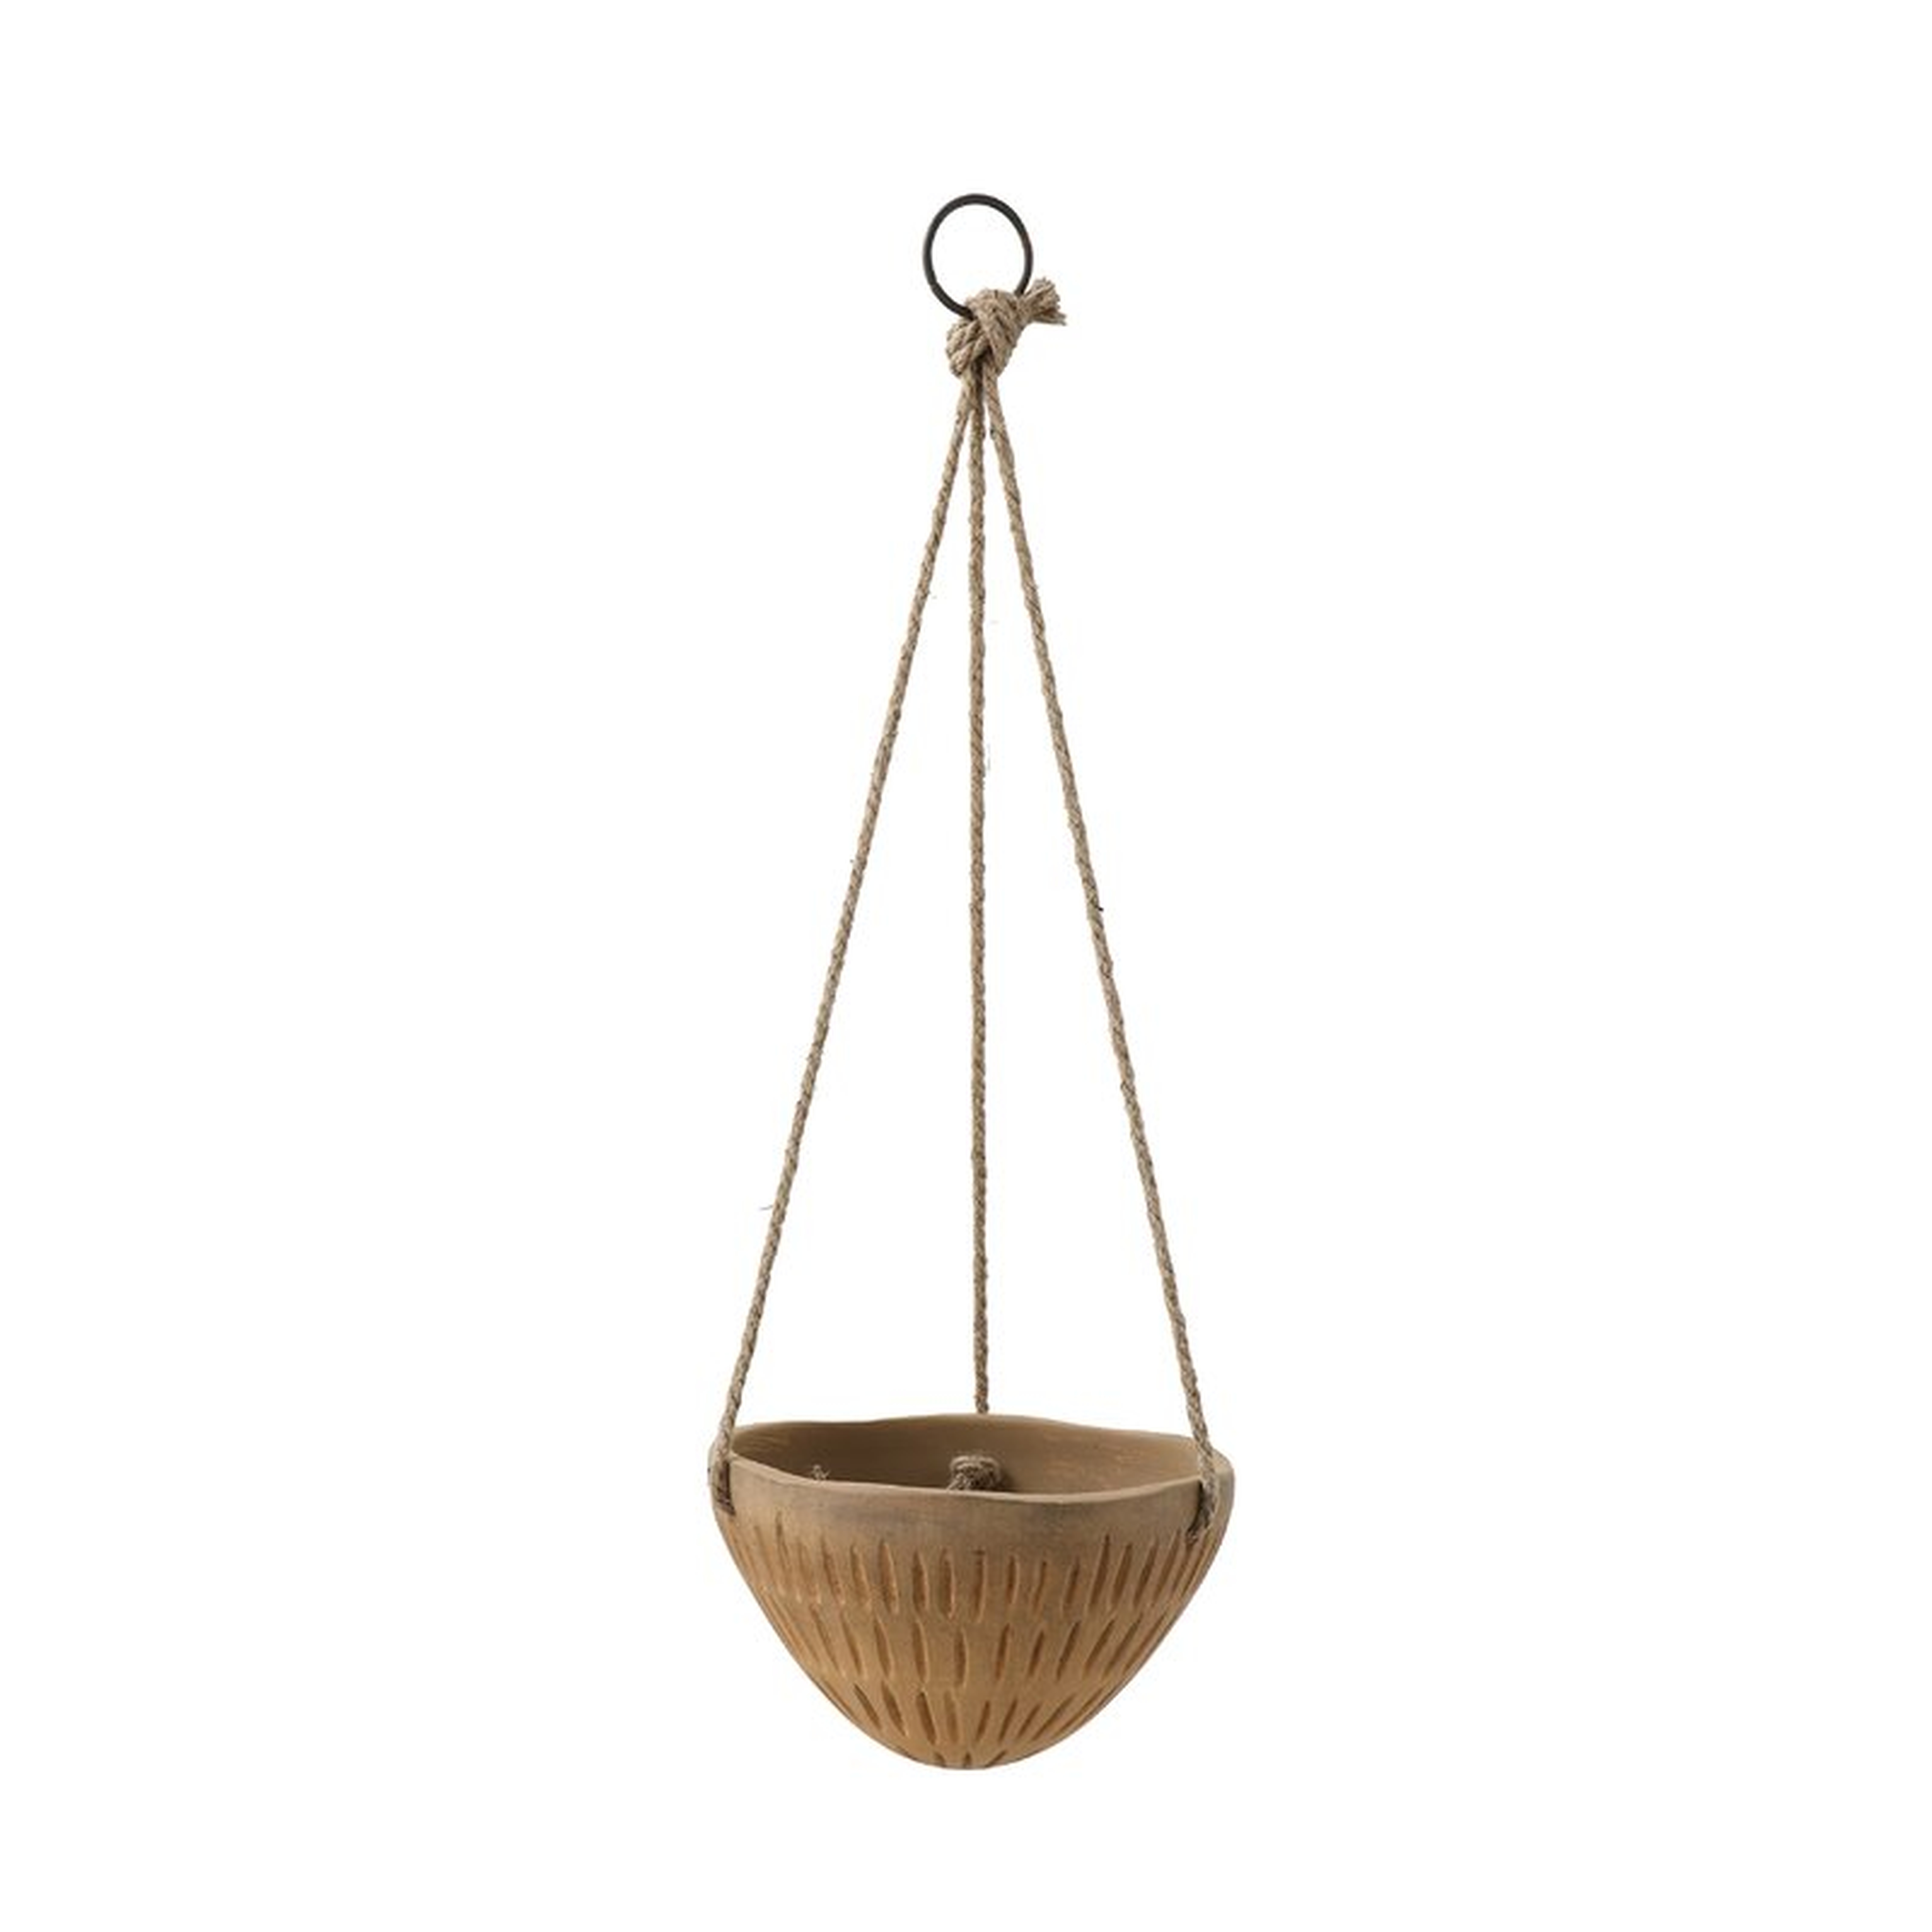 Bloomingville Round Terracotta Hanging Planter Size: 4.25" H x 8" W x 8" D - Perigold